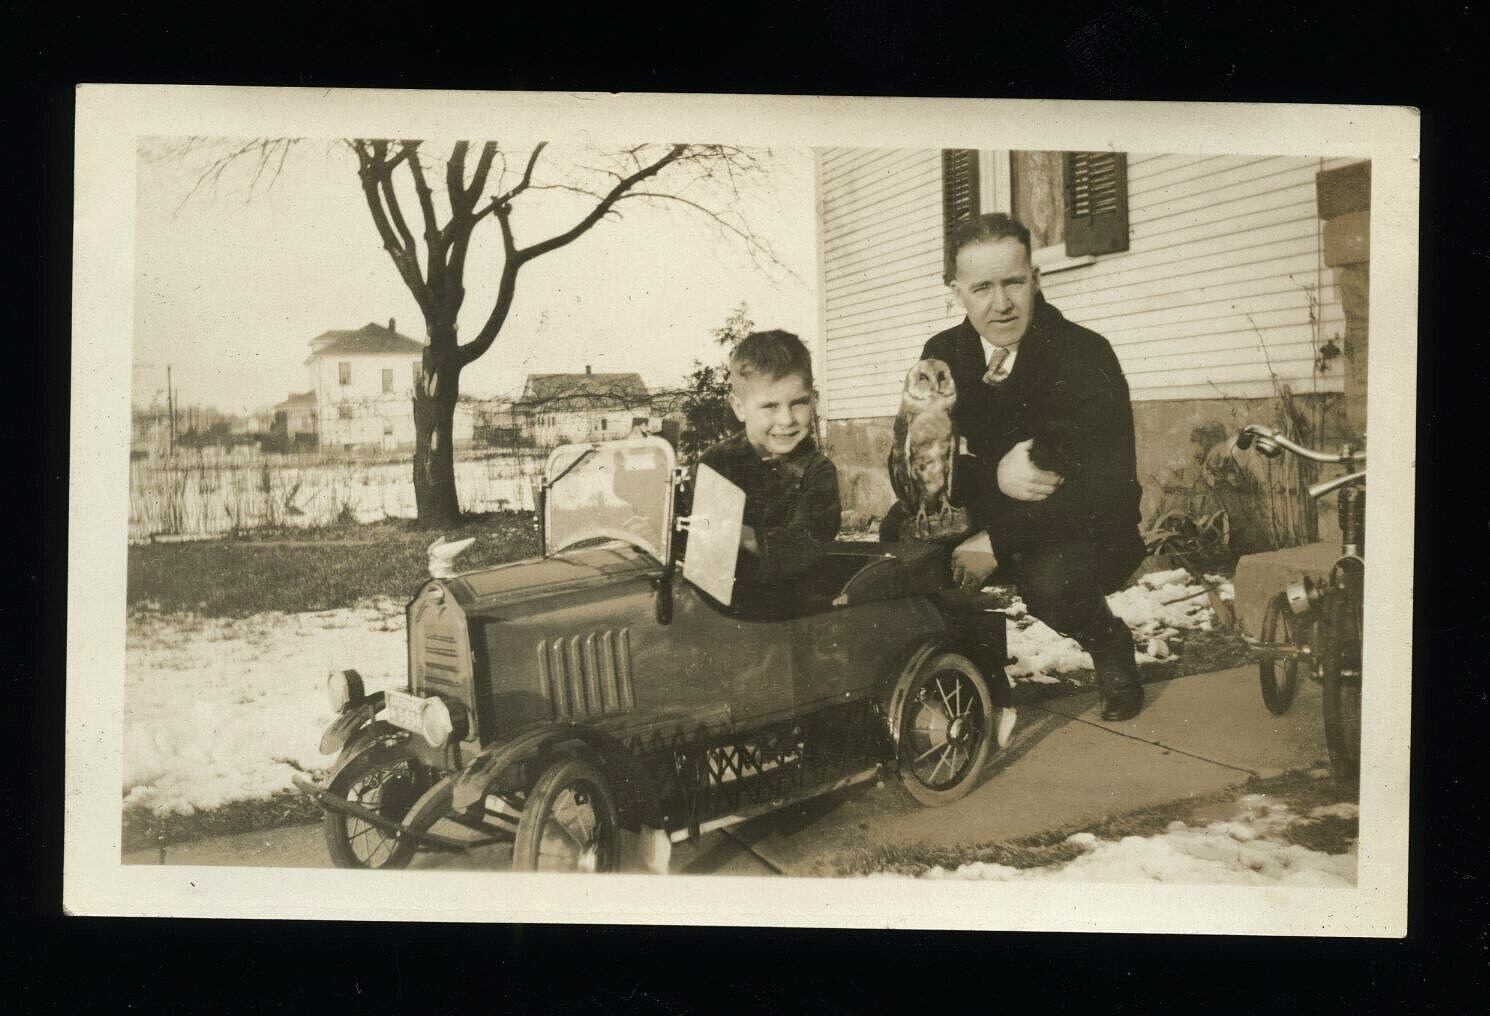 BOY DRIVING TOY PEDAL DERBY CAR WITH WEIRD OWL ON TRUNK 1920s VTG ANTIQUE PHOTO